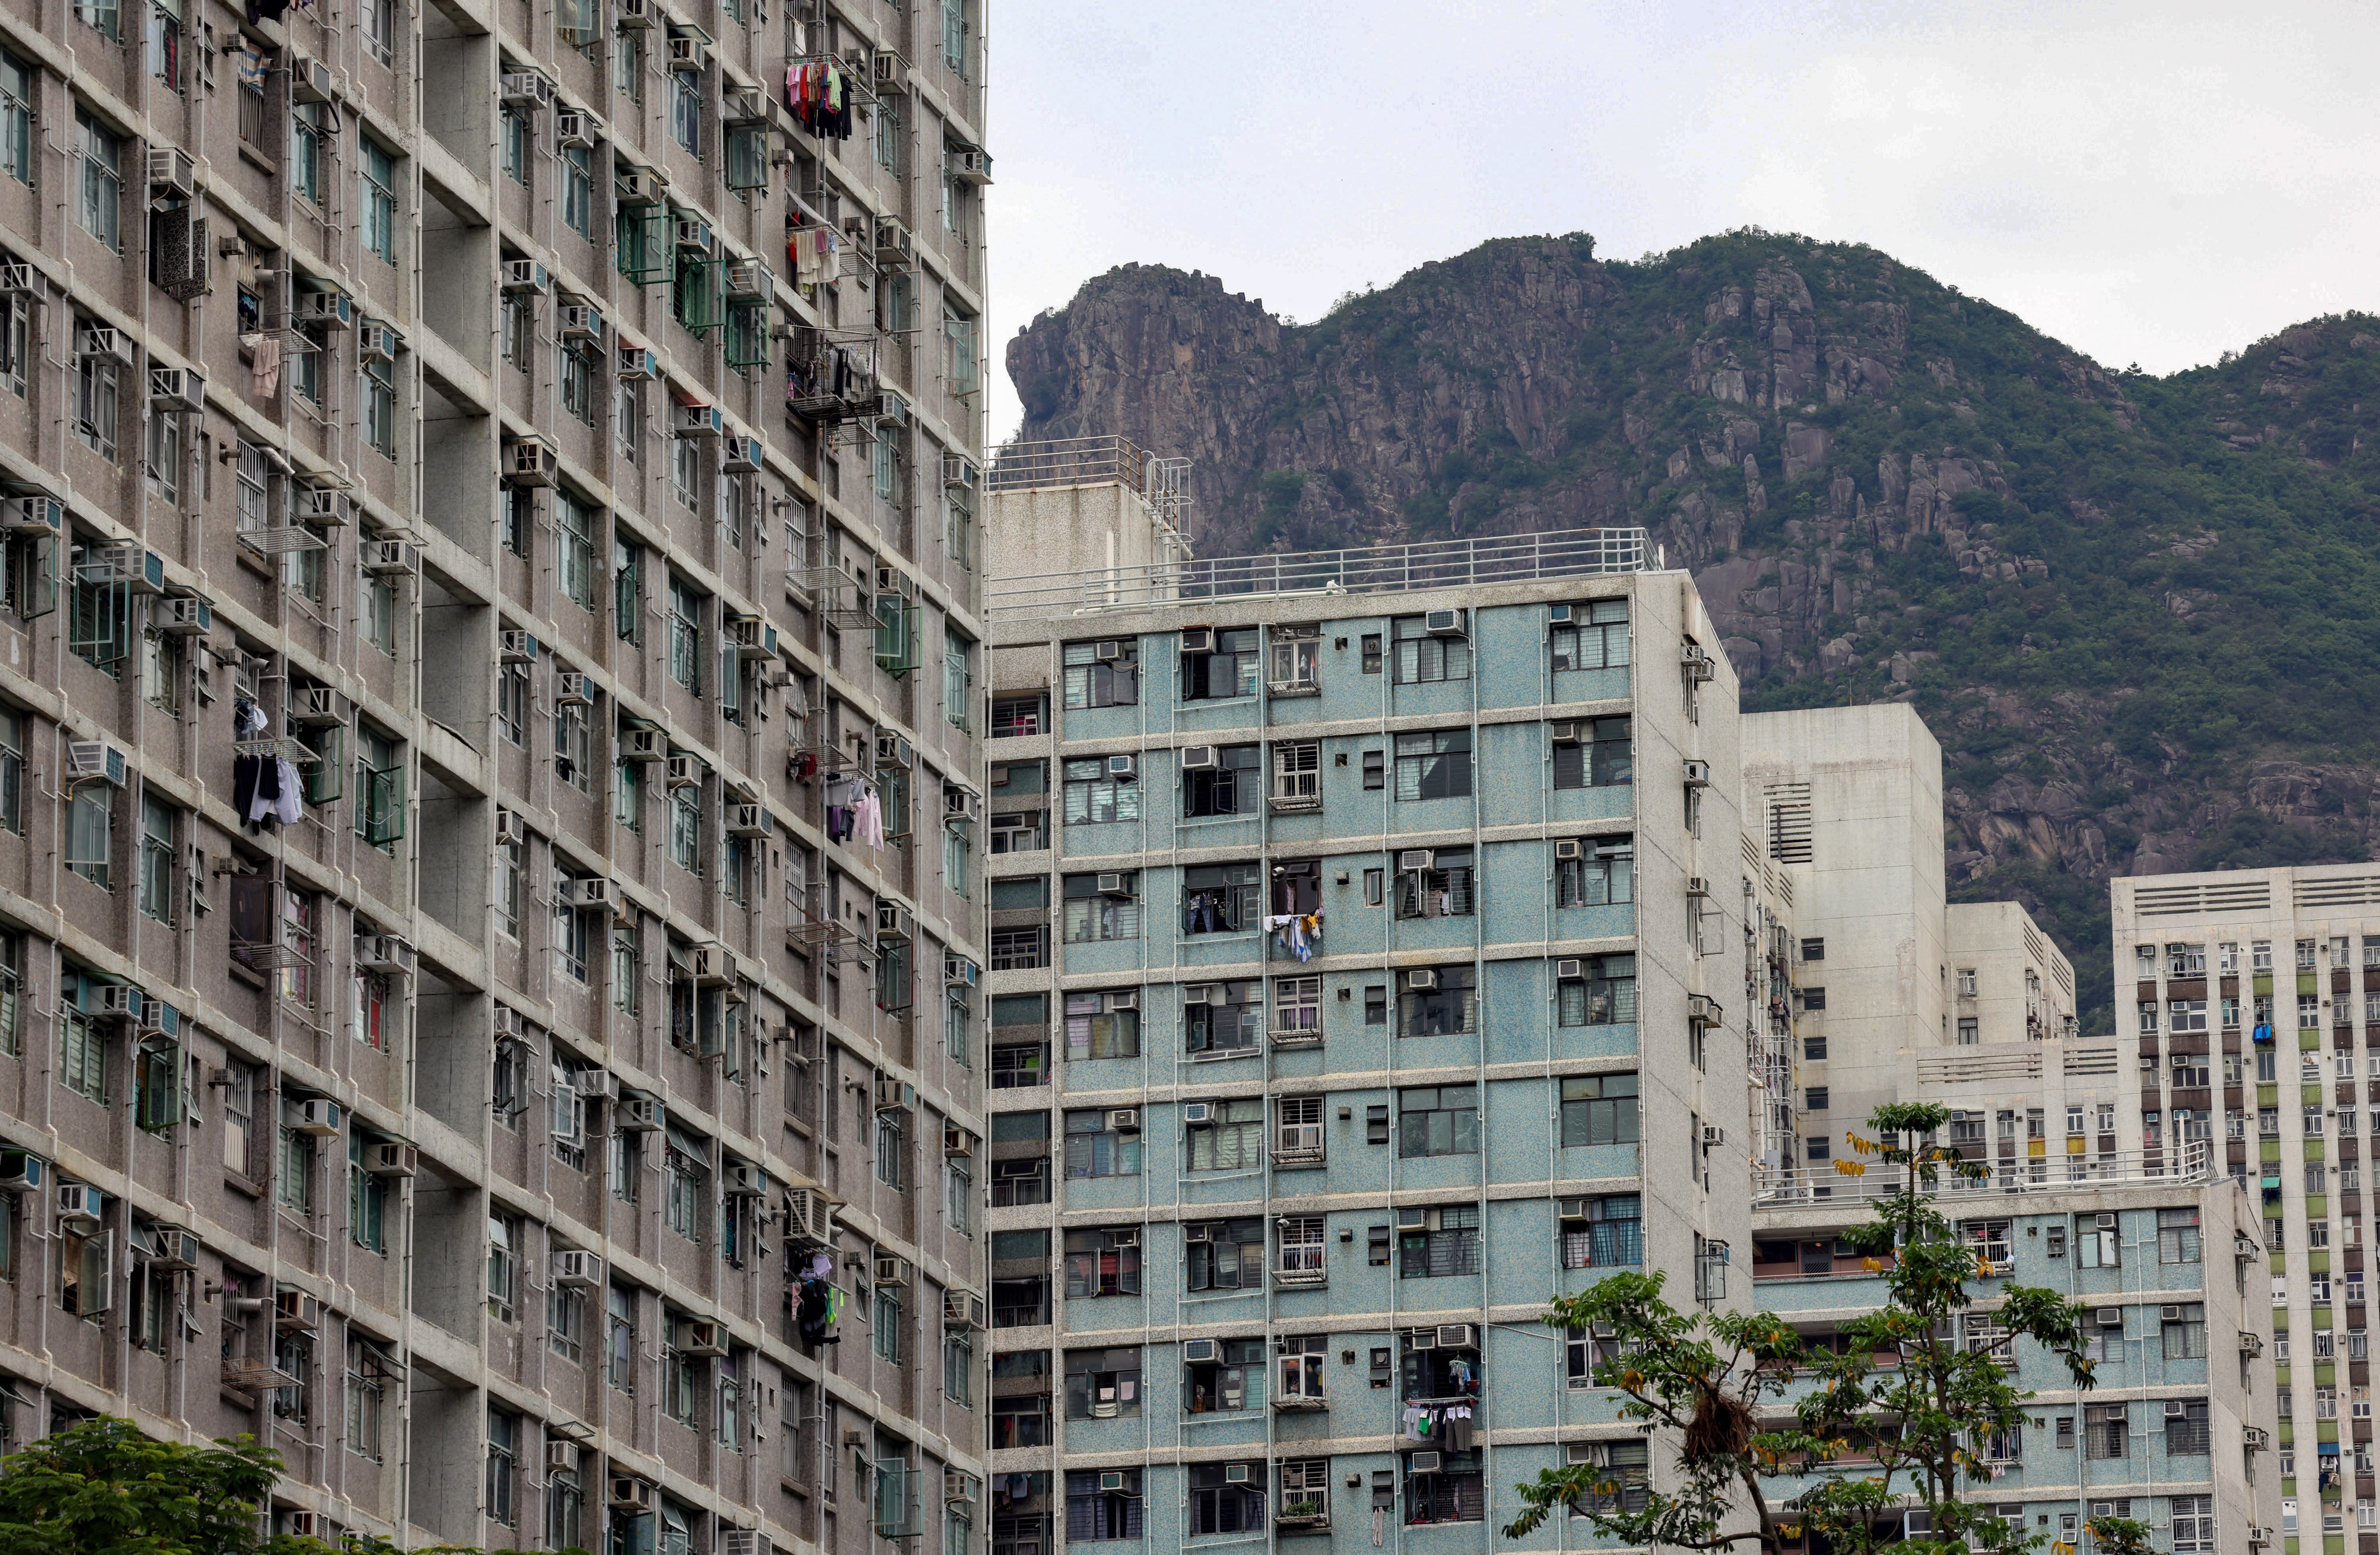 Hong Kong repossessed about 2,200 and 2,800 public rental flats in the past two financial years, according the city’s housing director. Photo: Jelly Tse